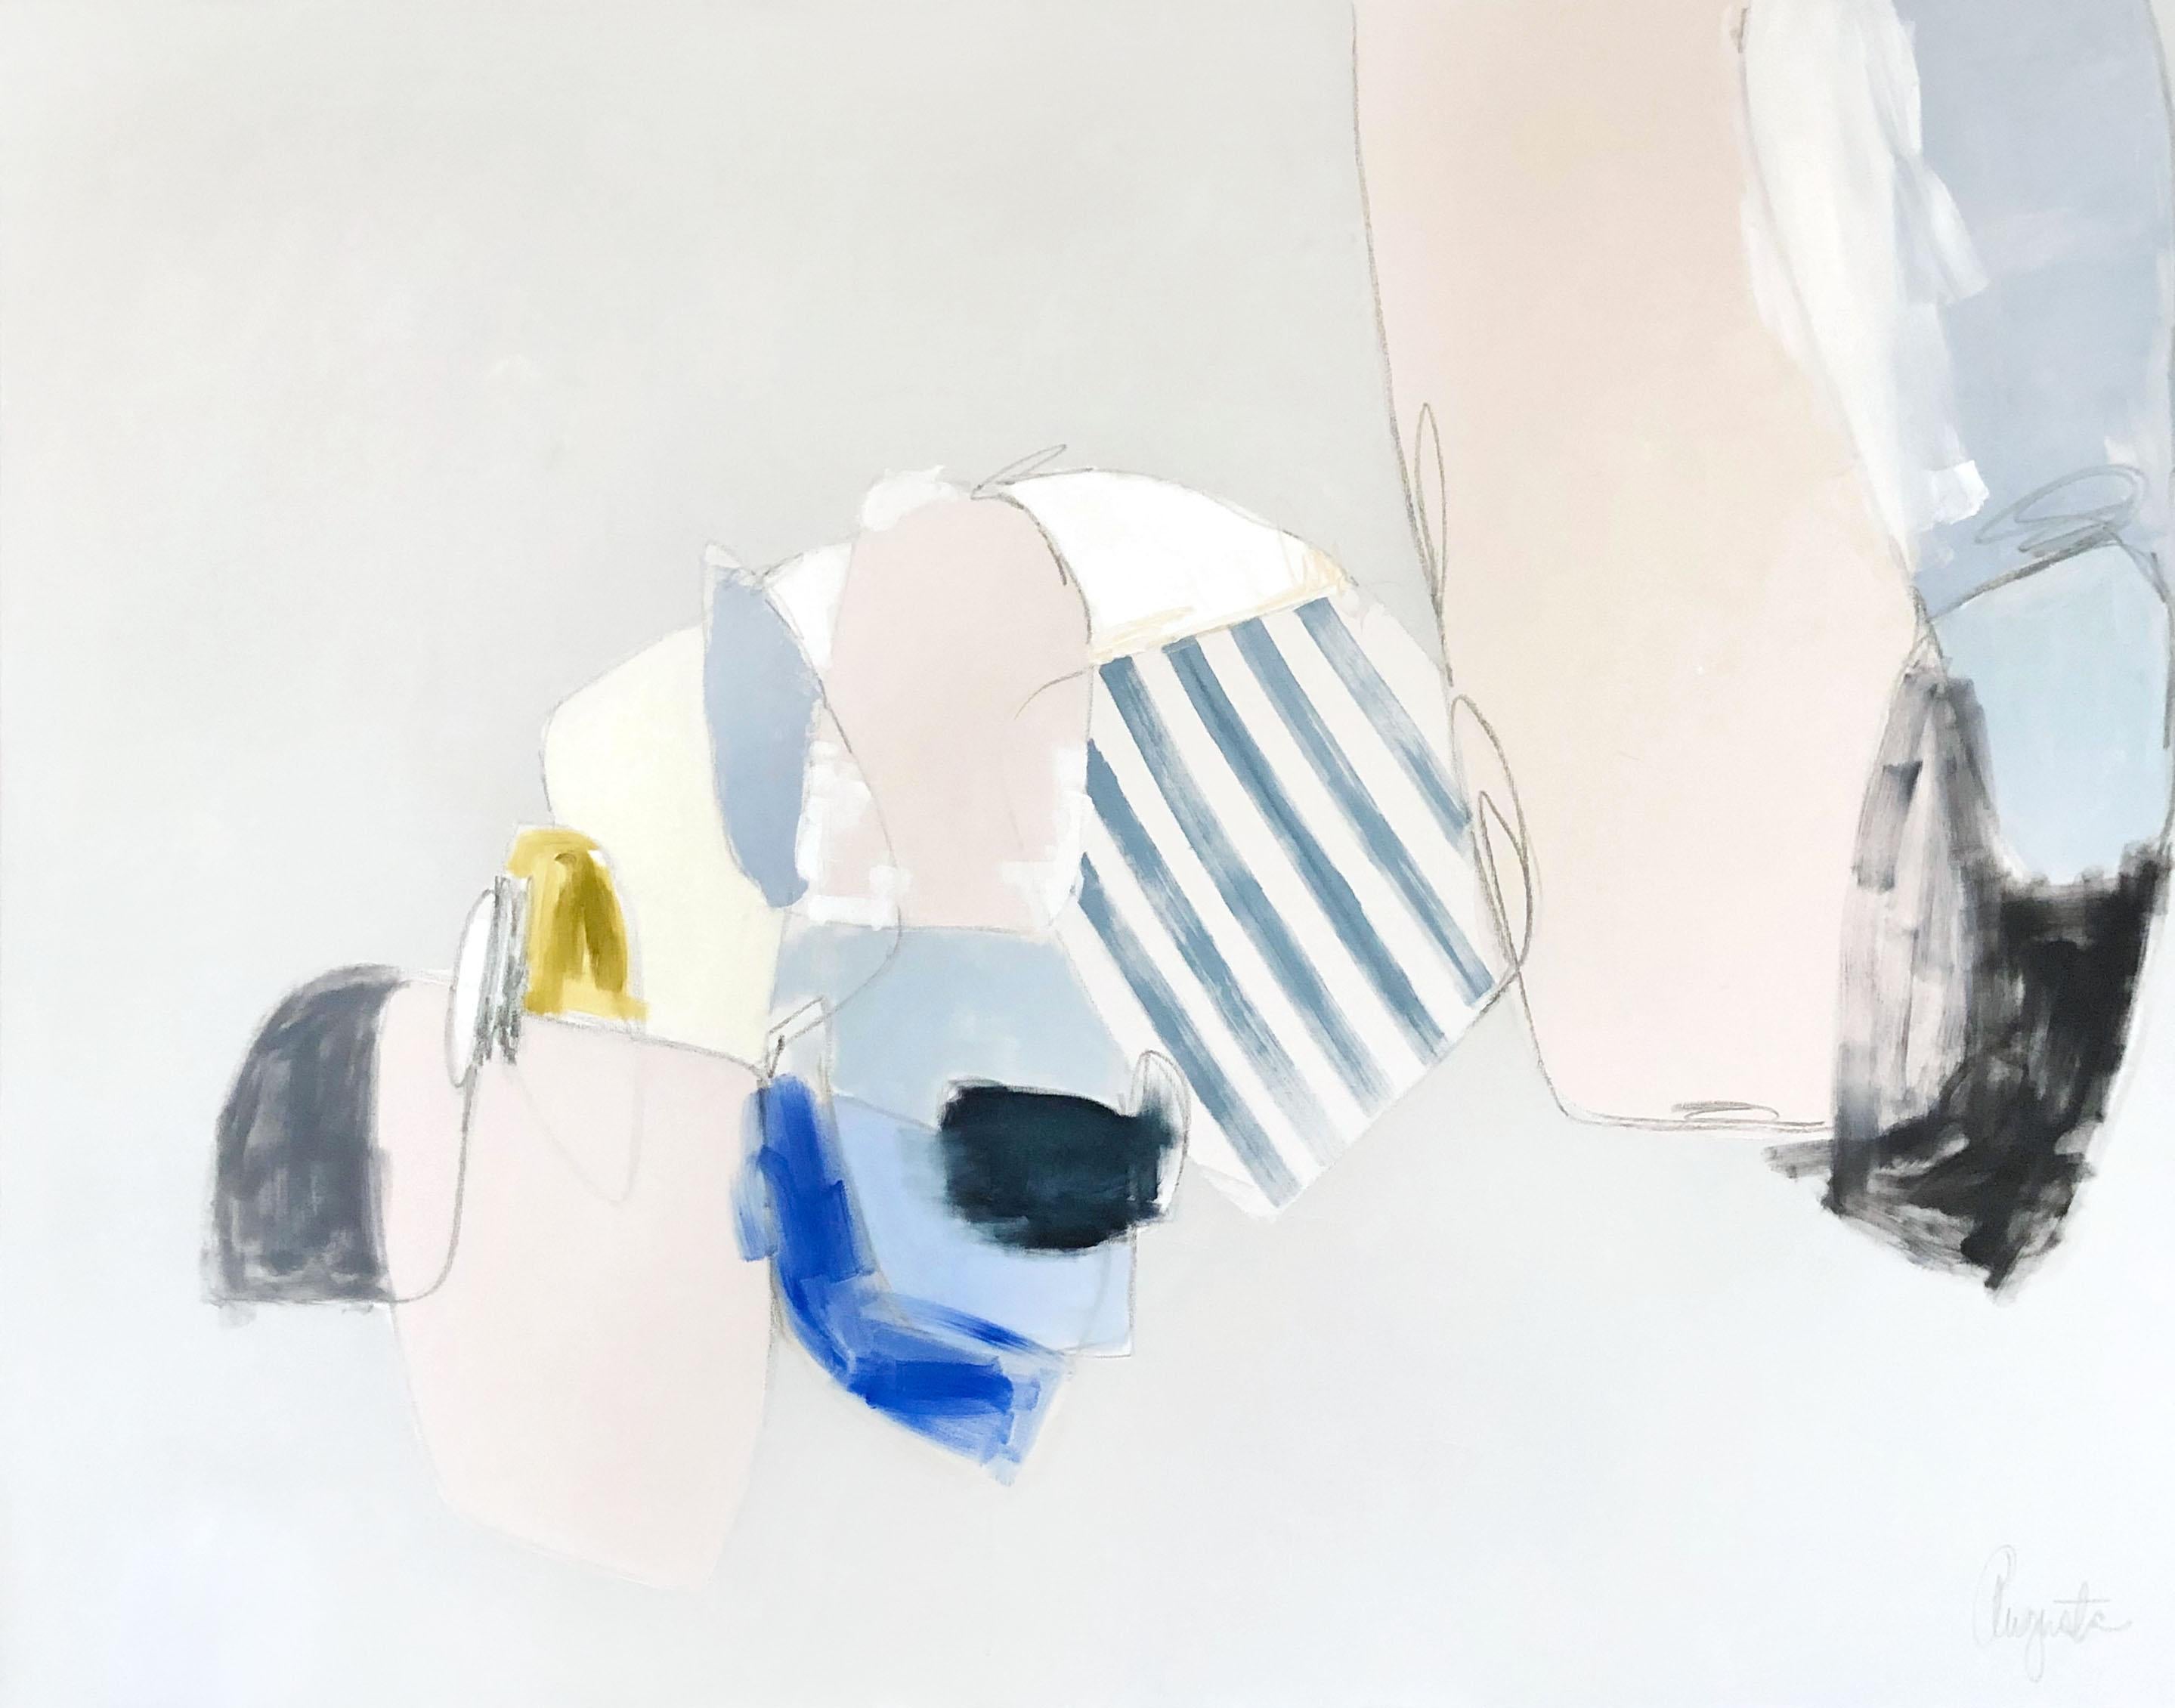 'Classic With a Twist' is a large abstract mixed media on canvas painting created by American artist Augusta Wilson in 2019. Featuring a palette made of white, blue, black, green and grey tones, the painting attracts our attention with its joyous